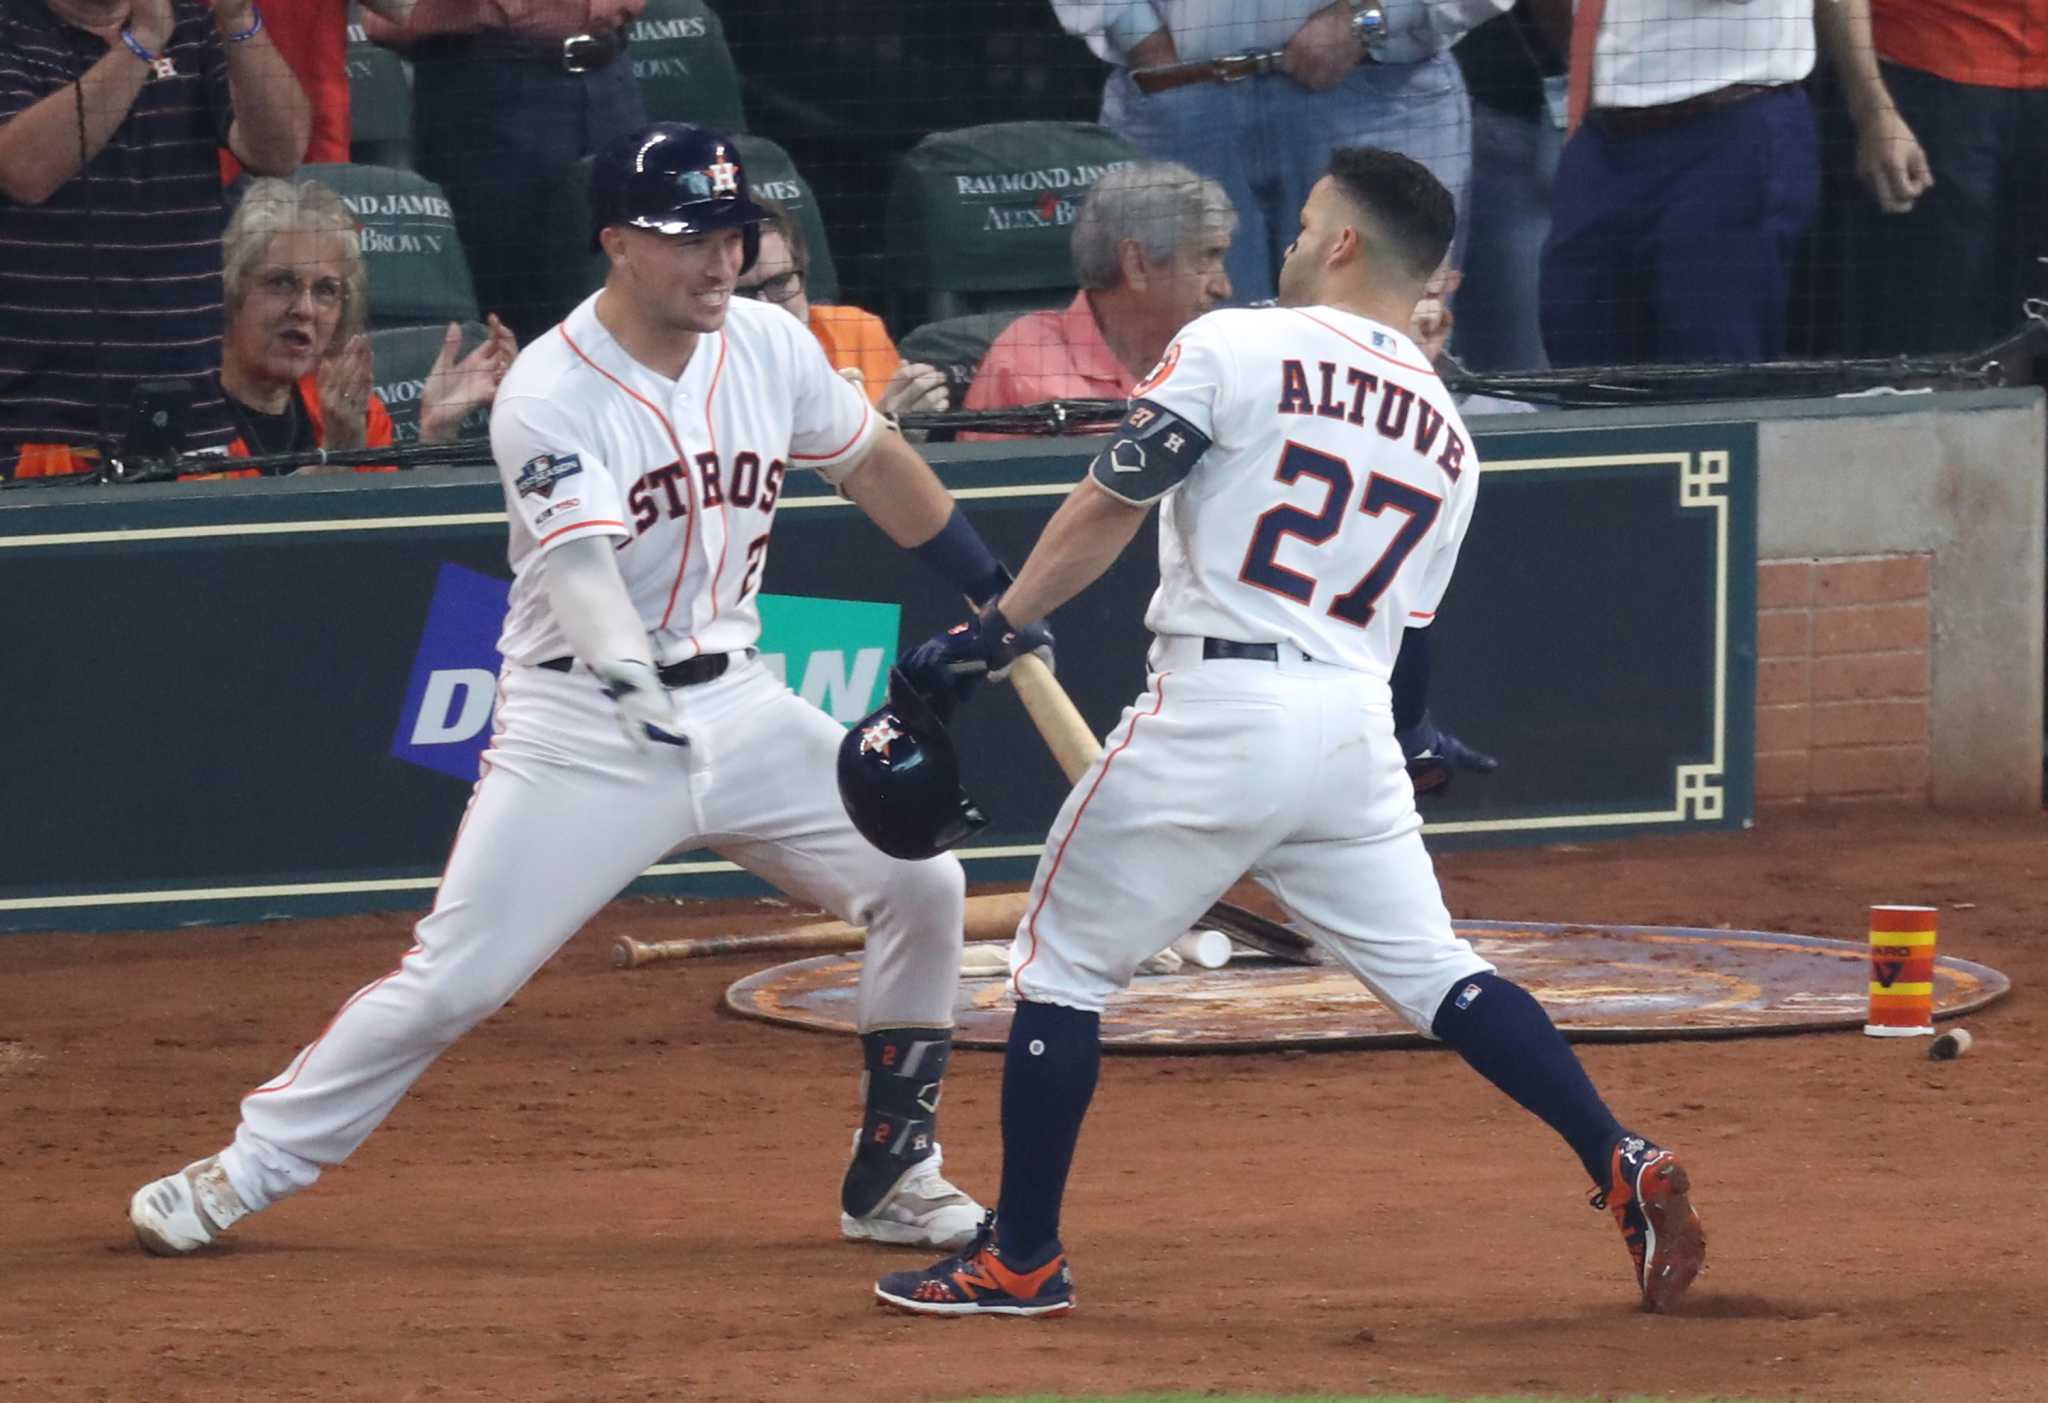 We've Got A New Photo Of Jose Altuve Next To Someone Tall